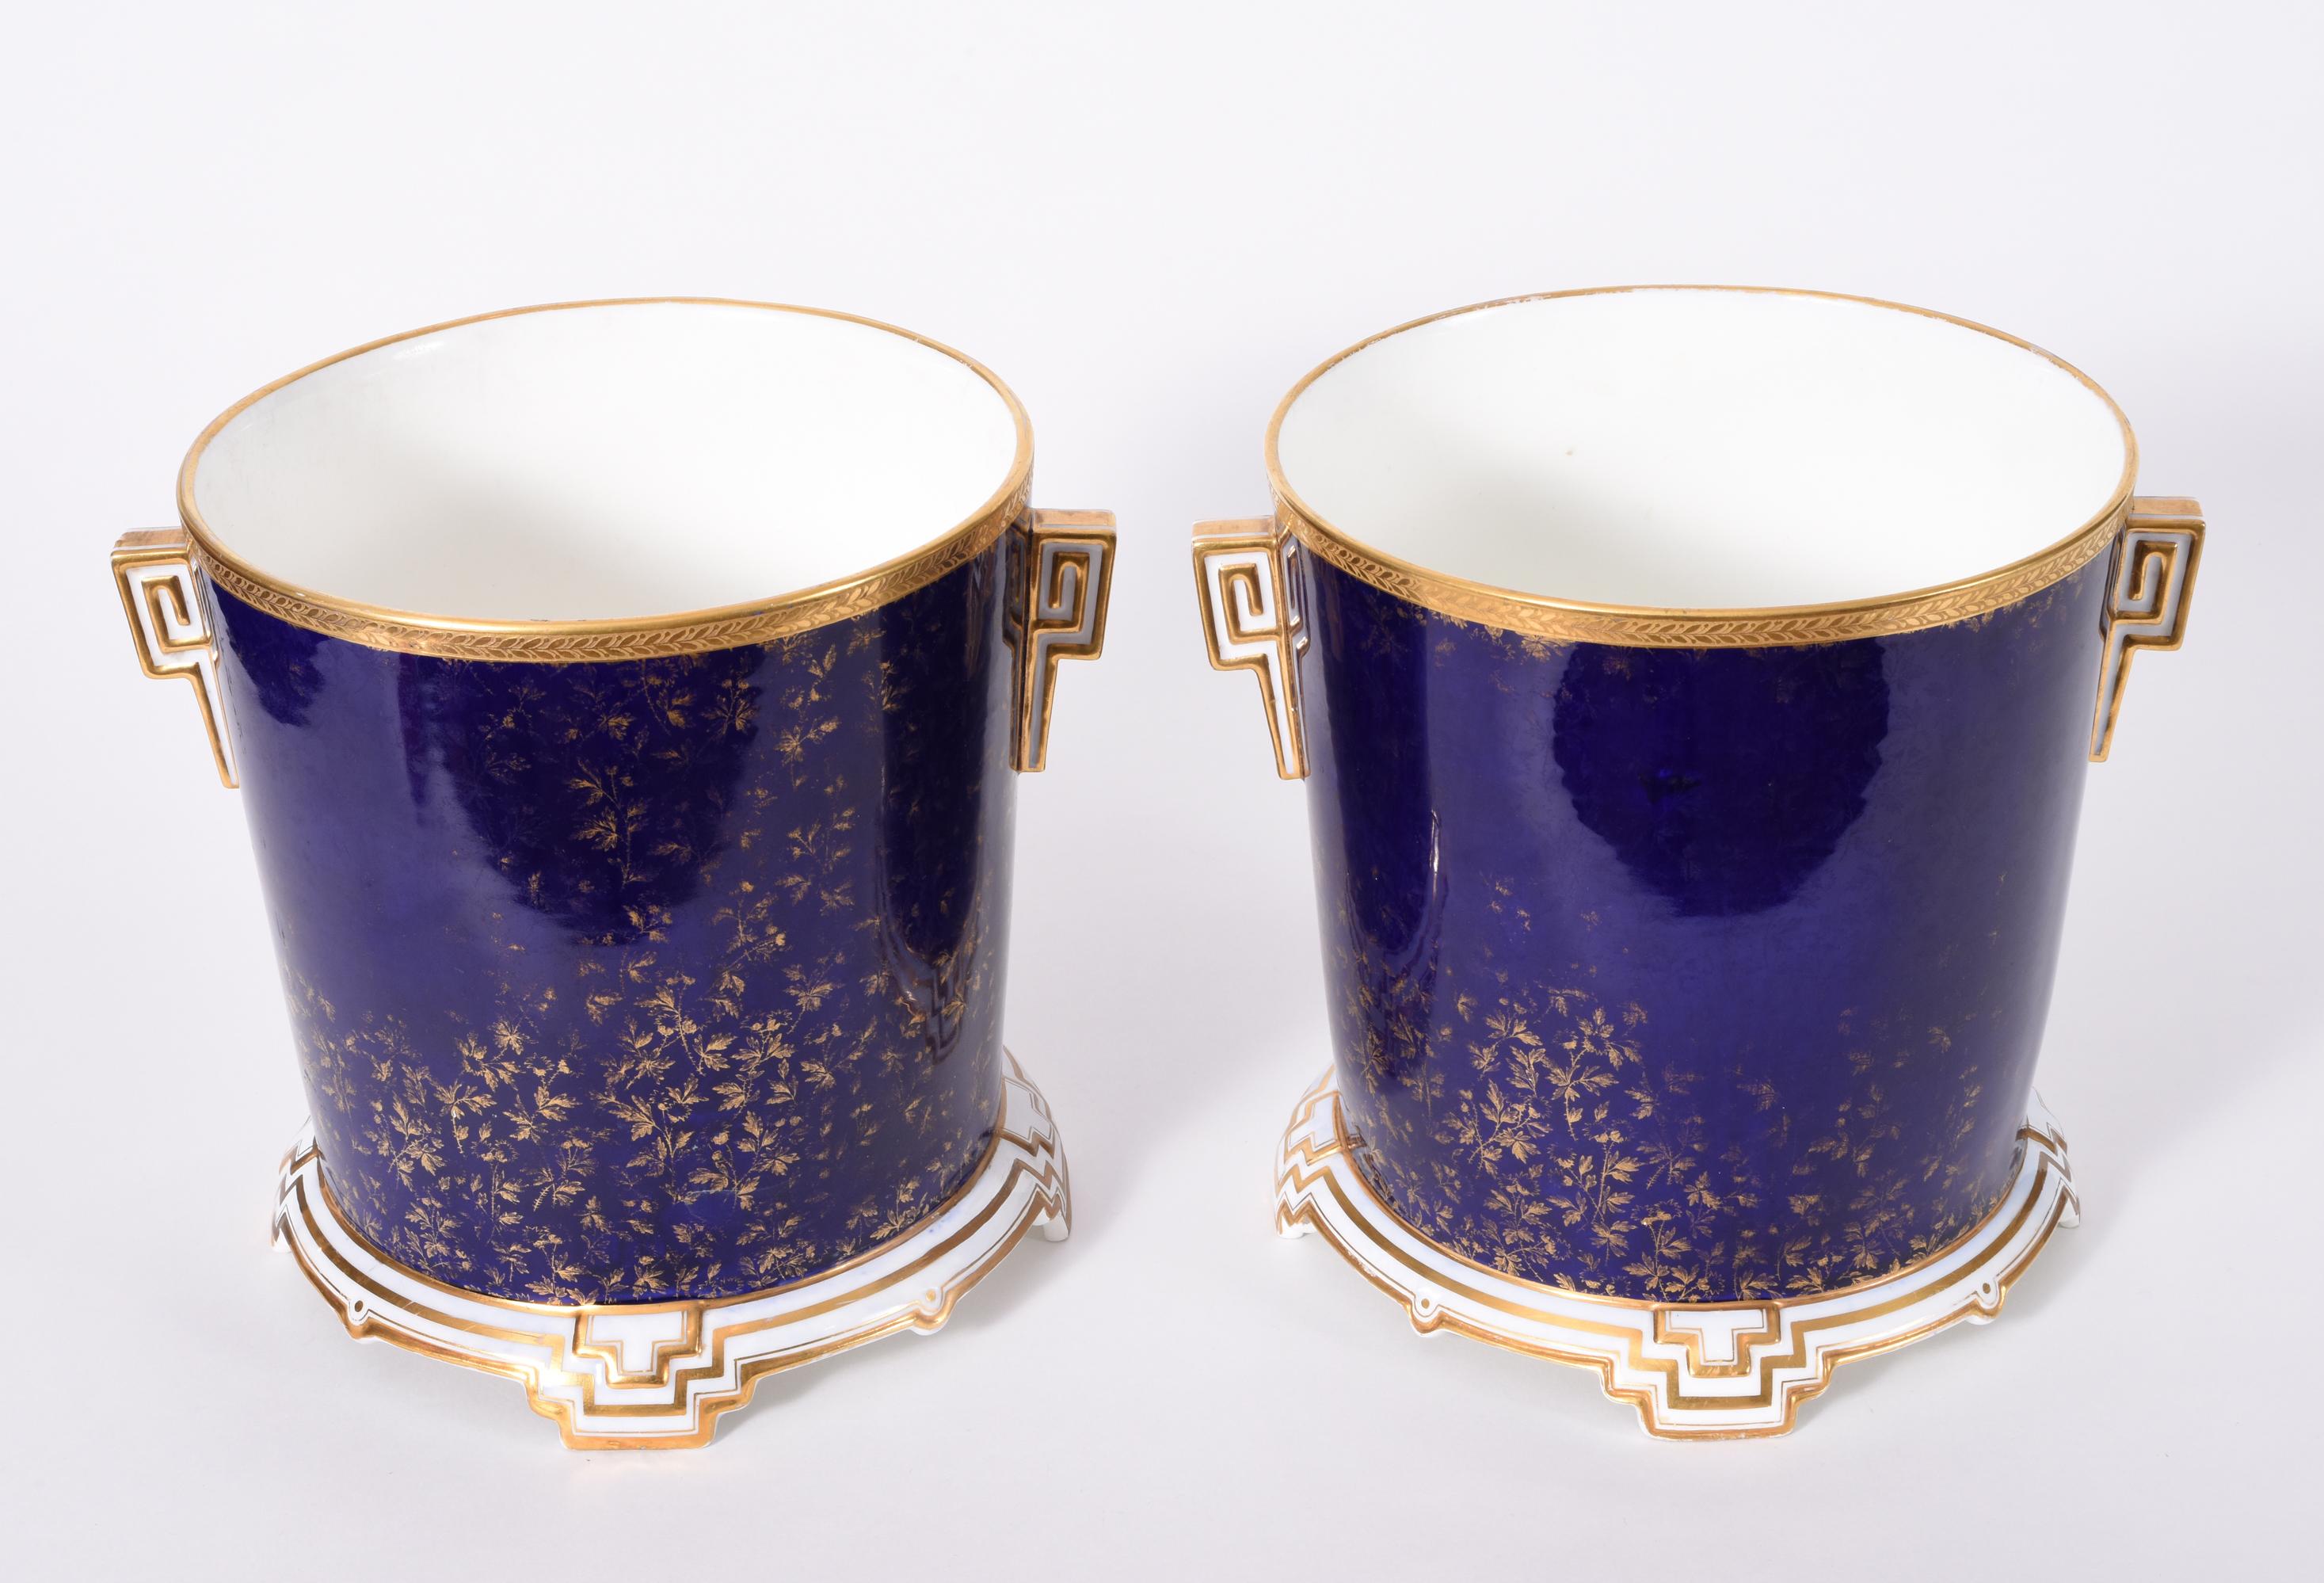 Late 19th century matching pair of English porcelain Wedgwood wine coolers / ice bucket. These coolers are just exquisite with gold-plated design details and in excellent antique condition. Maker's mark undersigned . Each cooler measure about 8.4